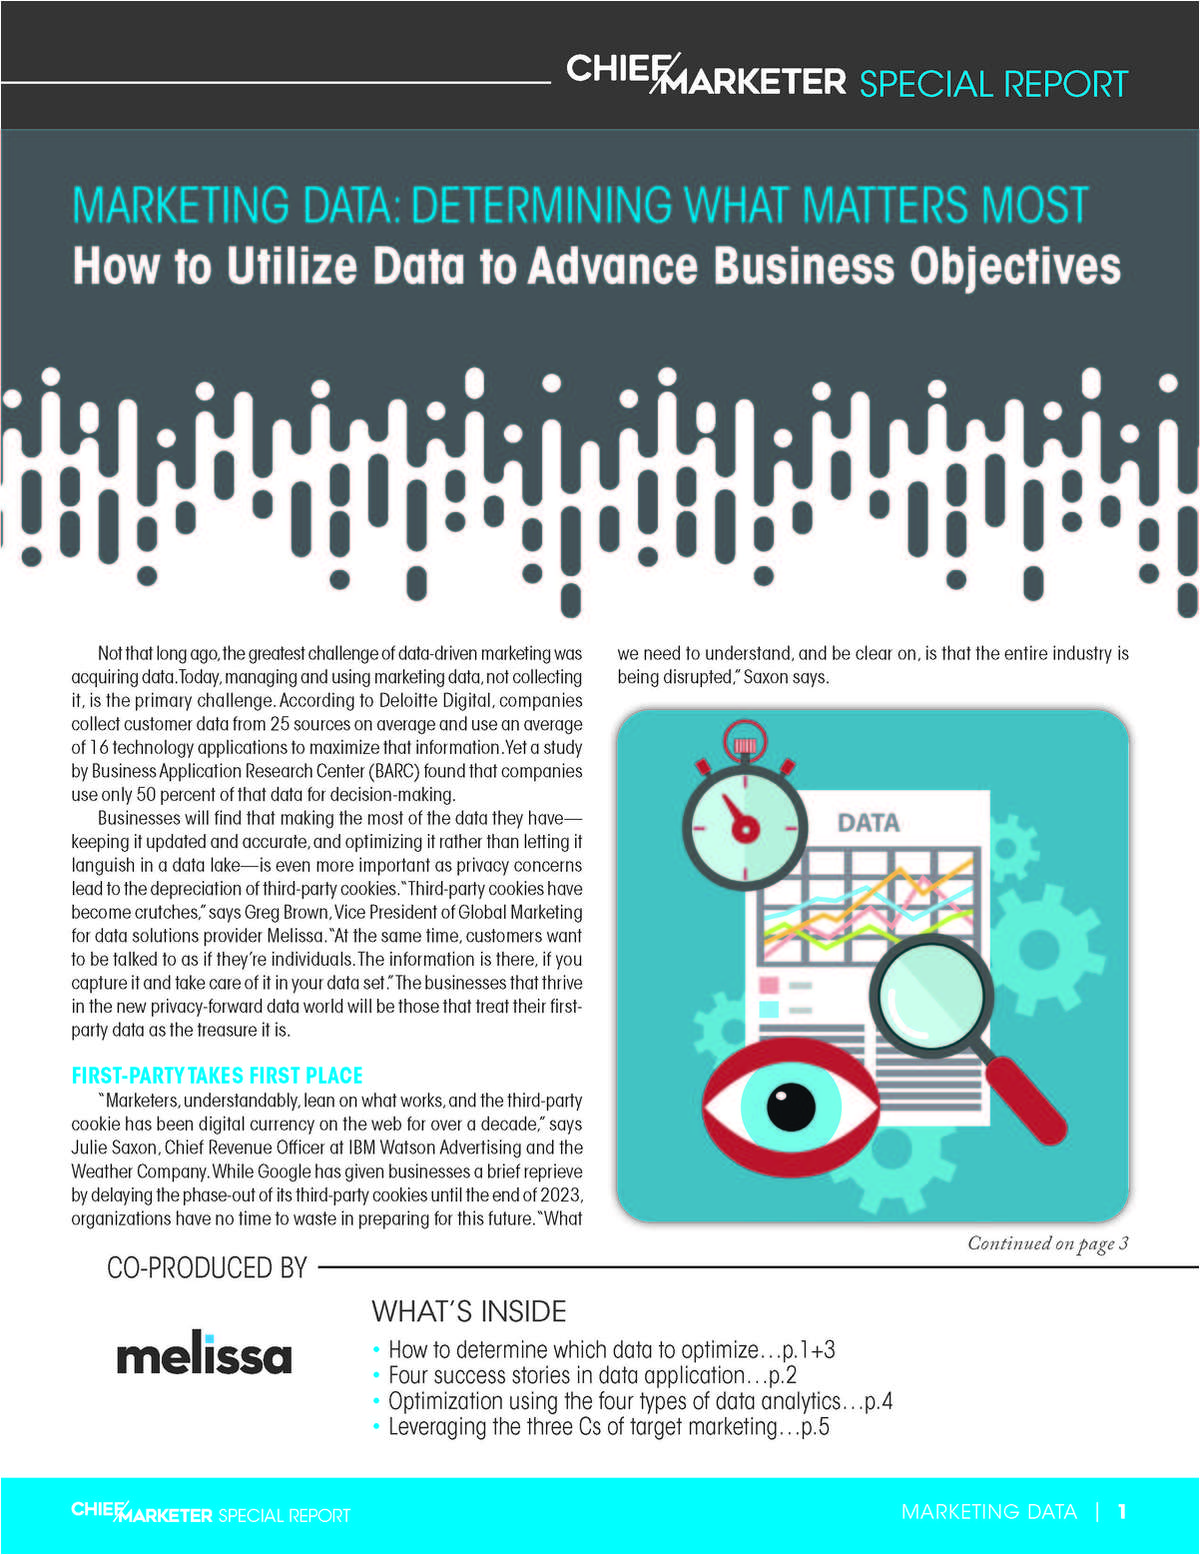 MARKETING DATA: Determining What Matters Most